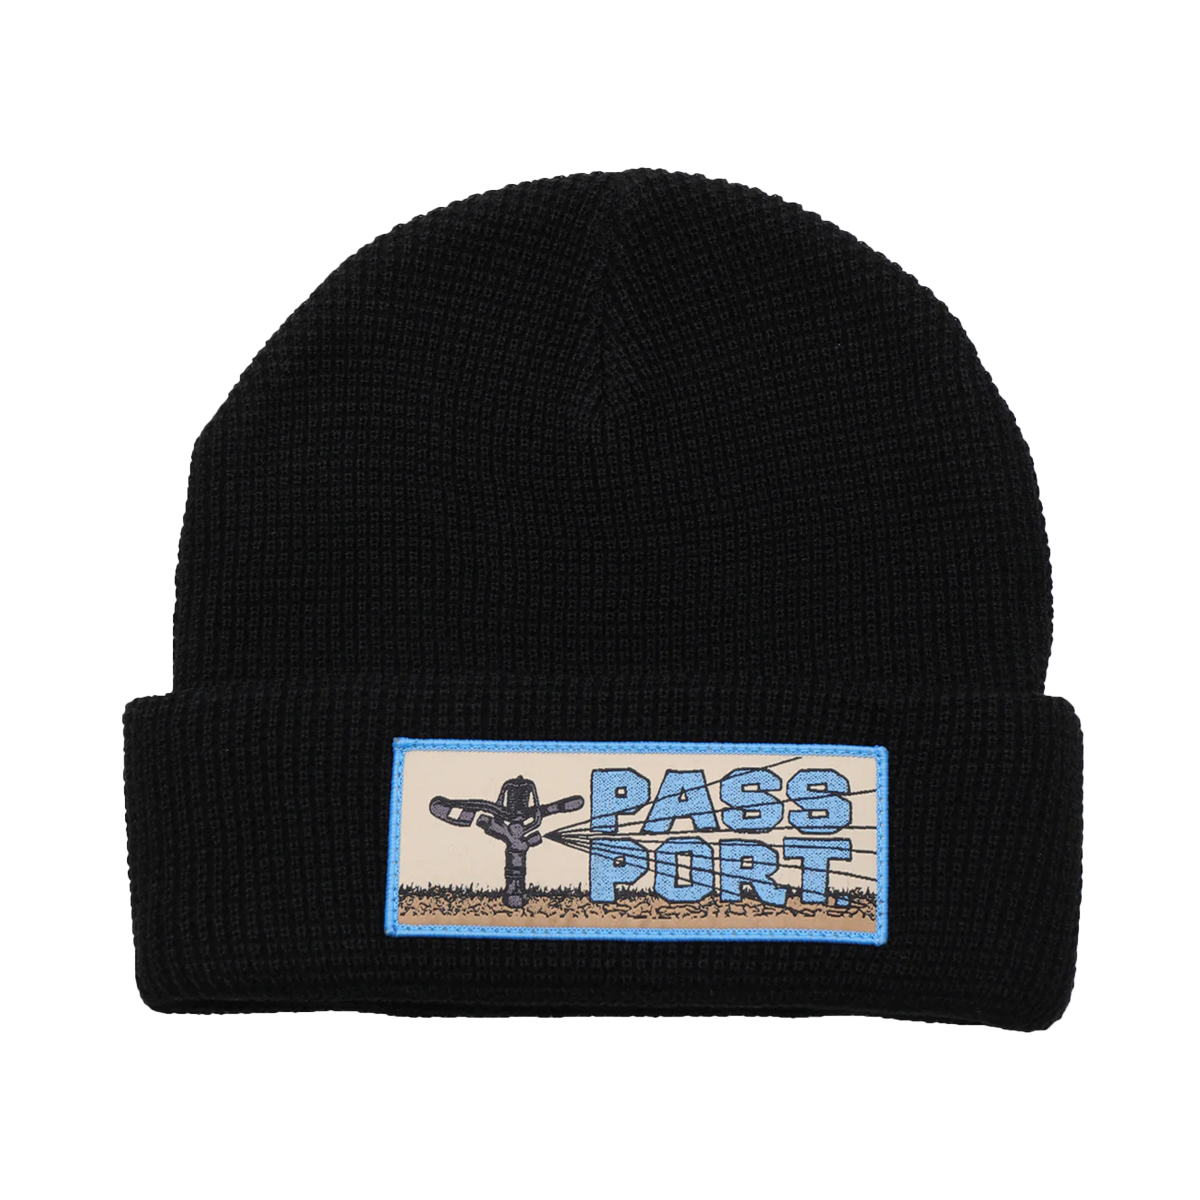 Passport Water Restrictions Beanie - Assorted Colors - Directive